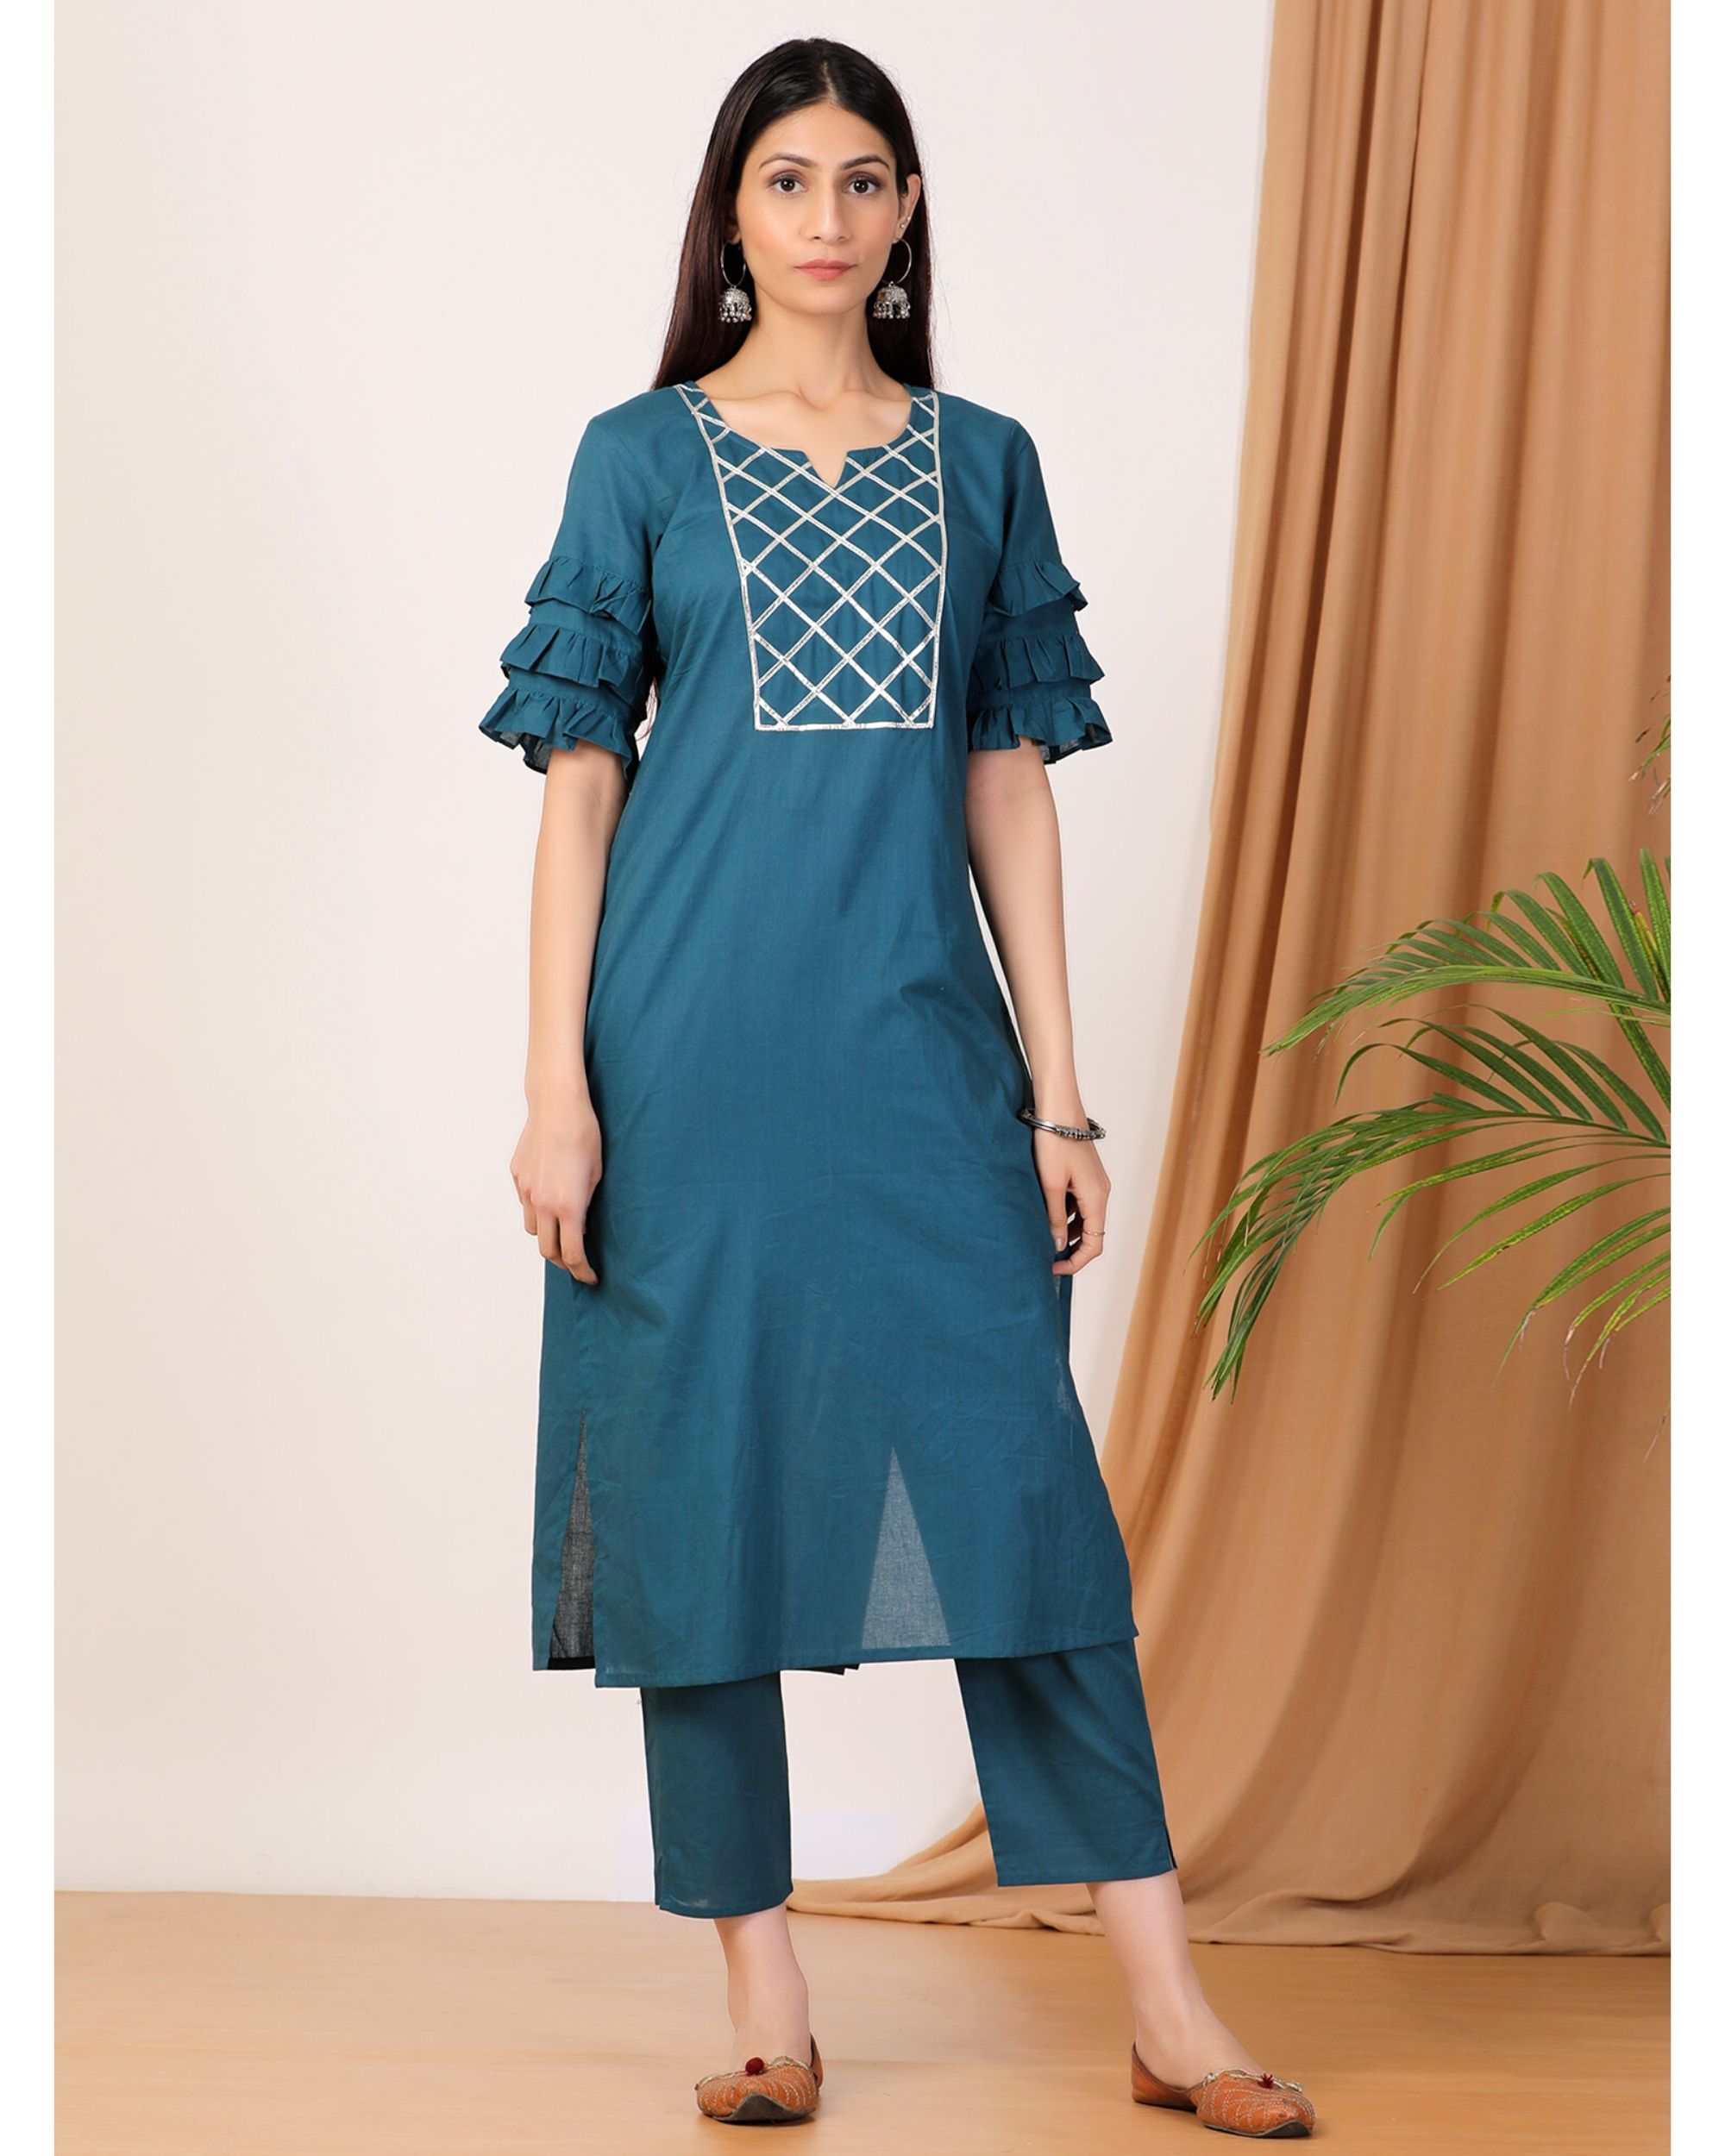 W Women Cobalt Blue Solid Kurta and Slim Pants Co-ord Set Price in India,  Full Specifications & Offers | DTashion.com